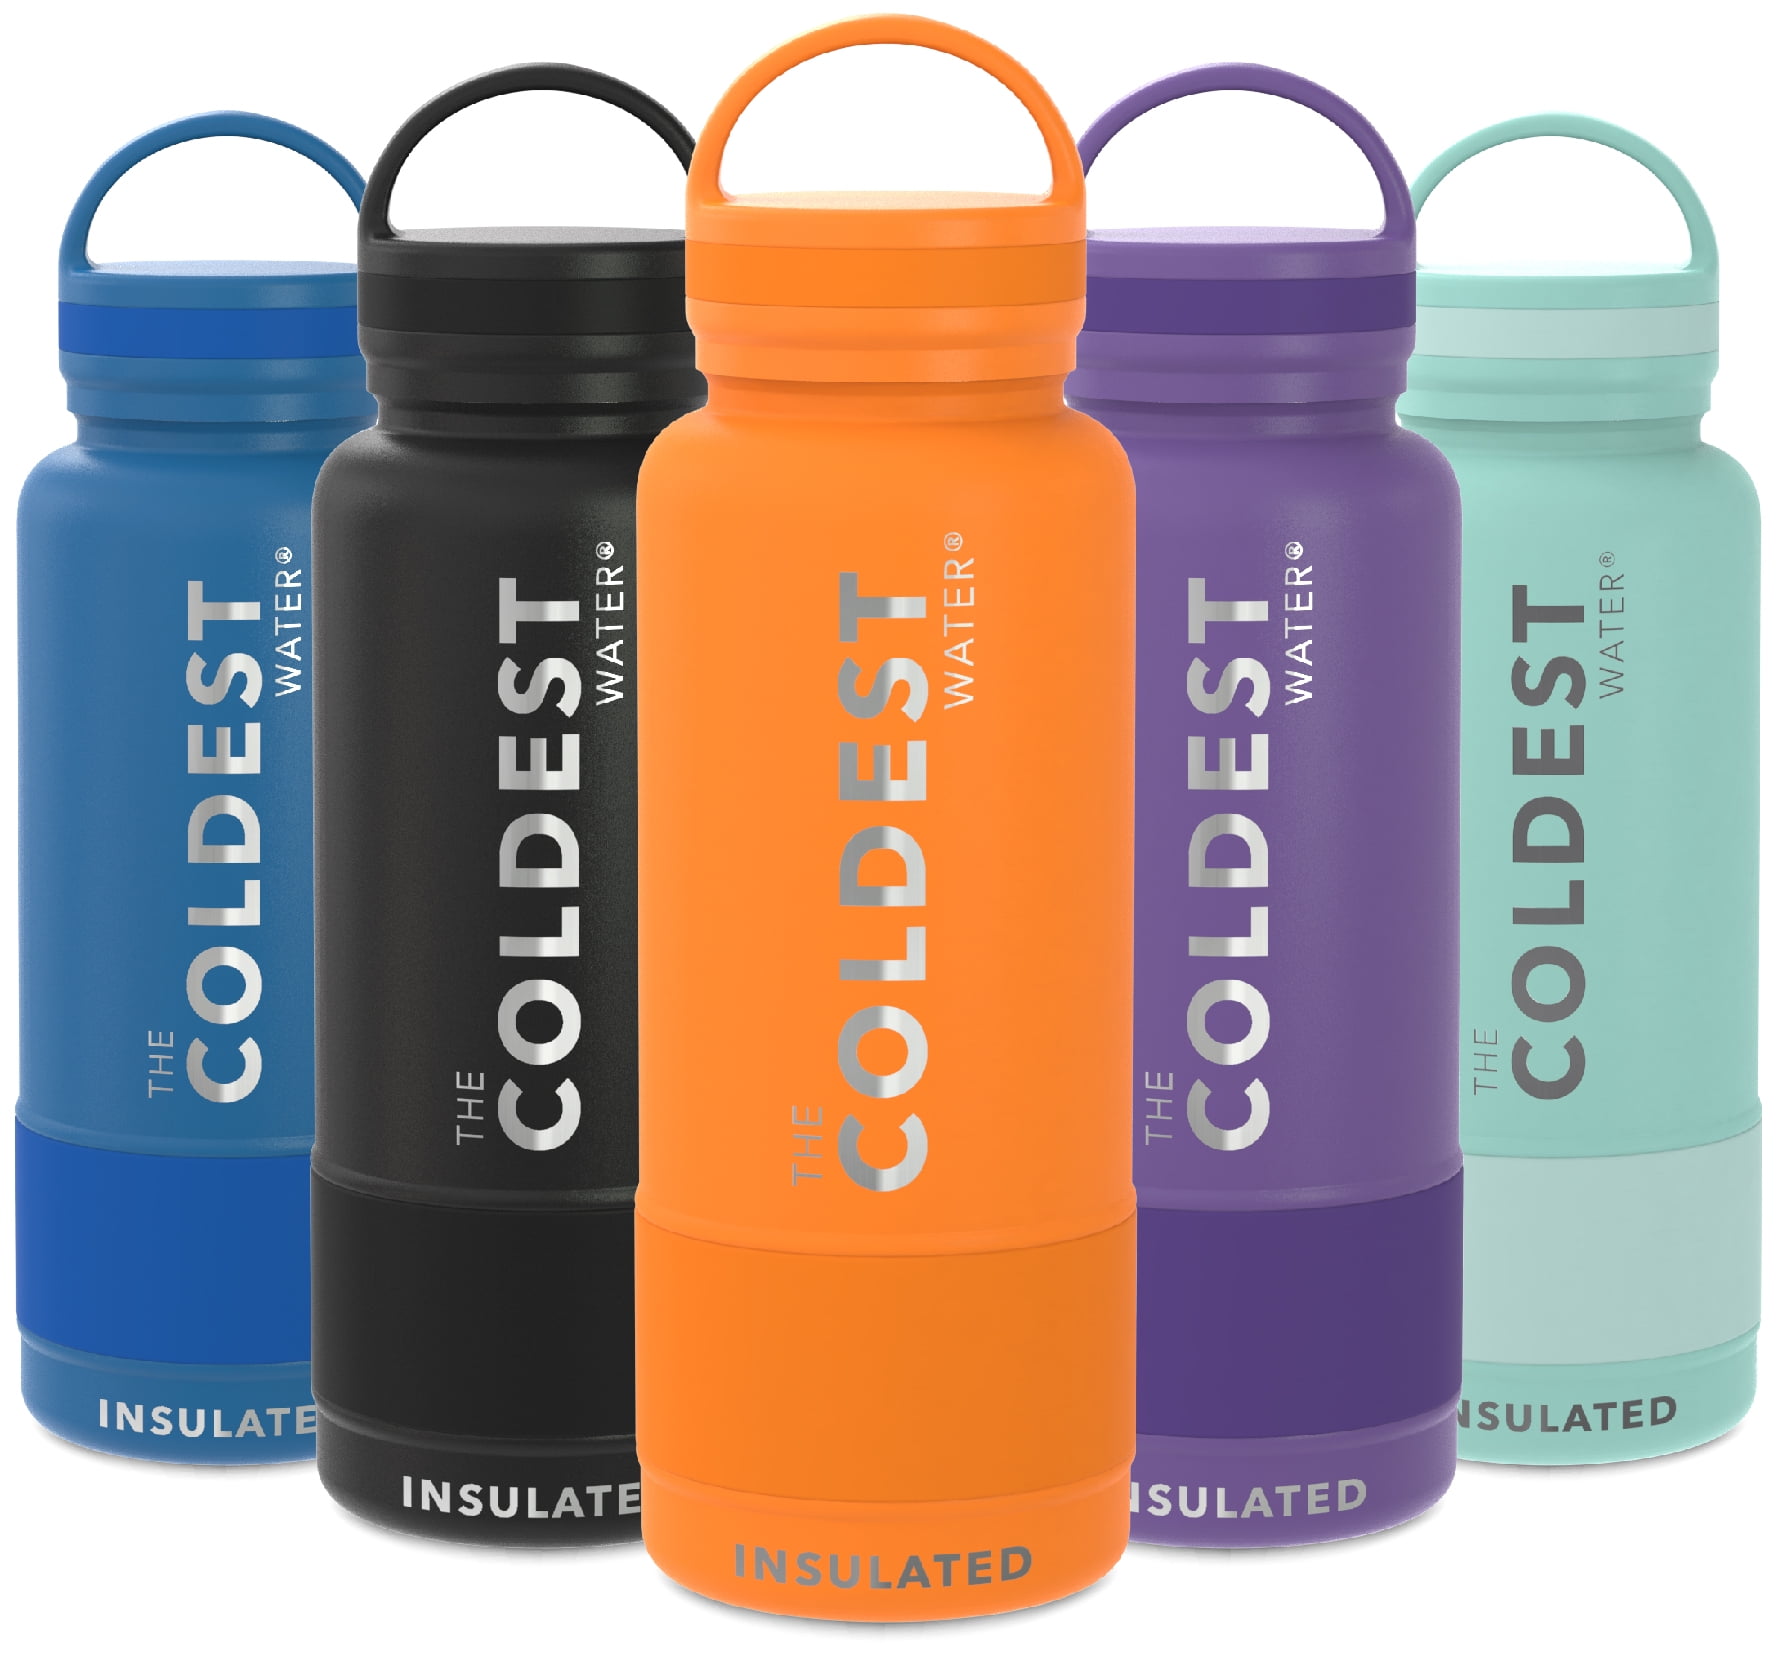 Coldest Water 1-Gallon Insulated Bottle keeps drinks cold for 36+ hours